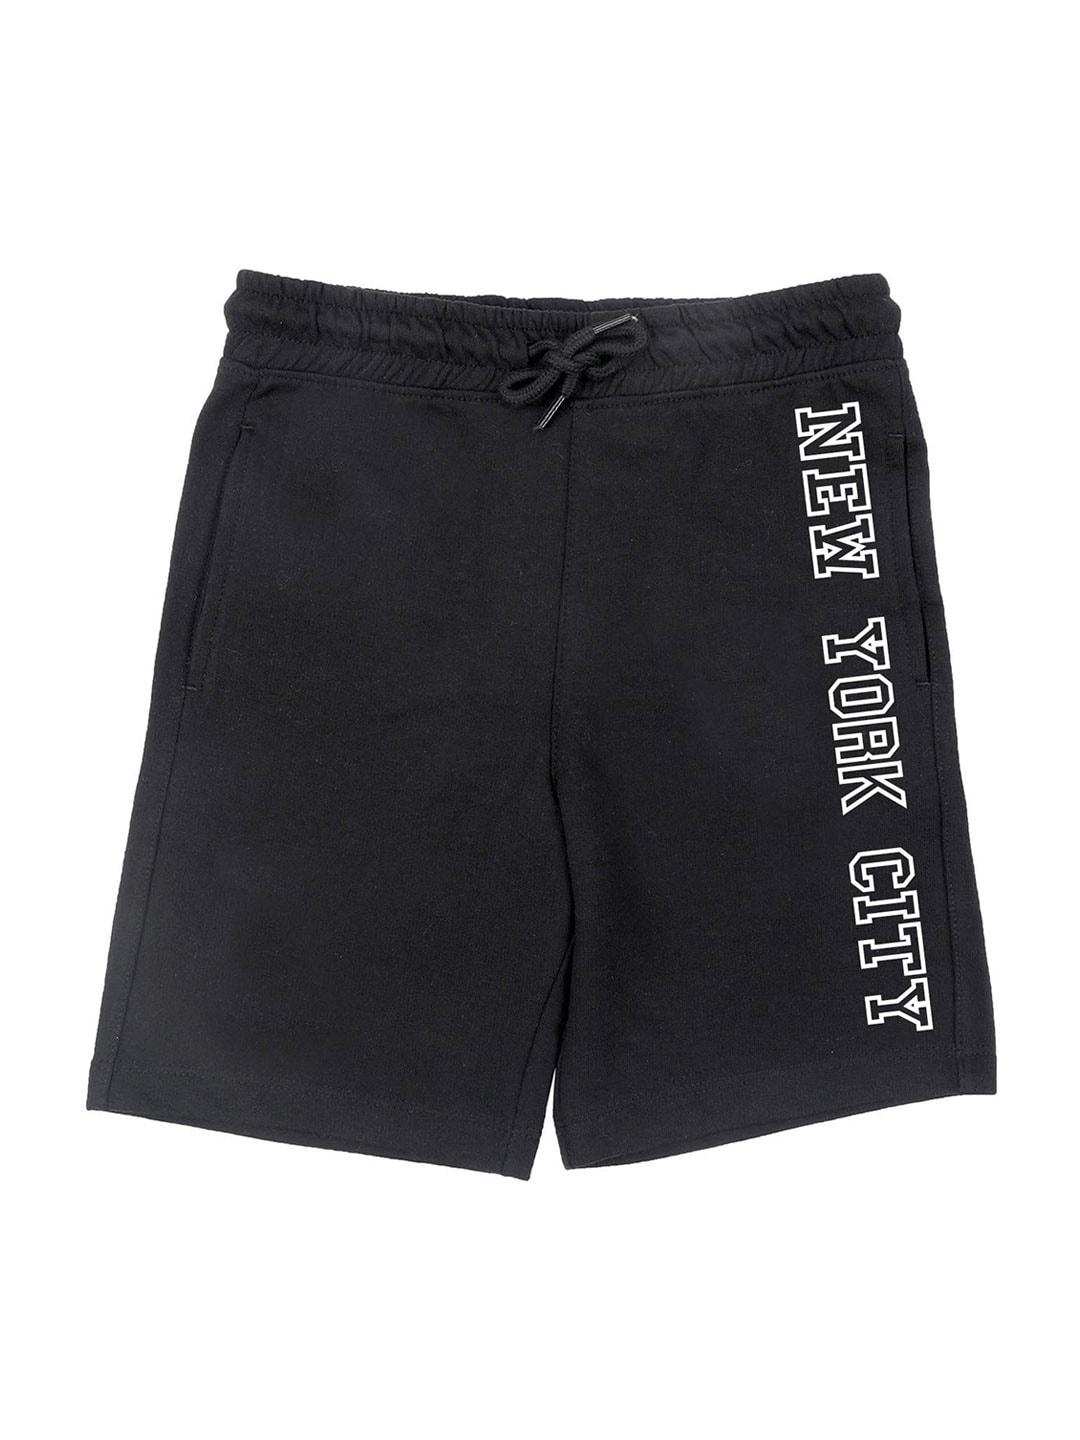 wear-your-mind-boys-black-typography-printed-shorts